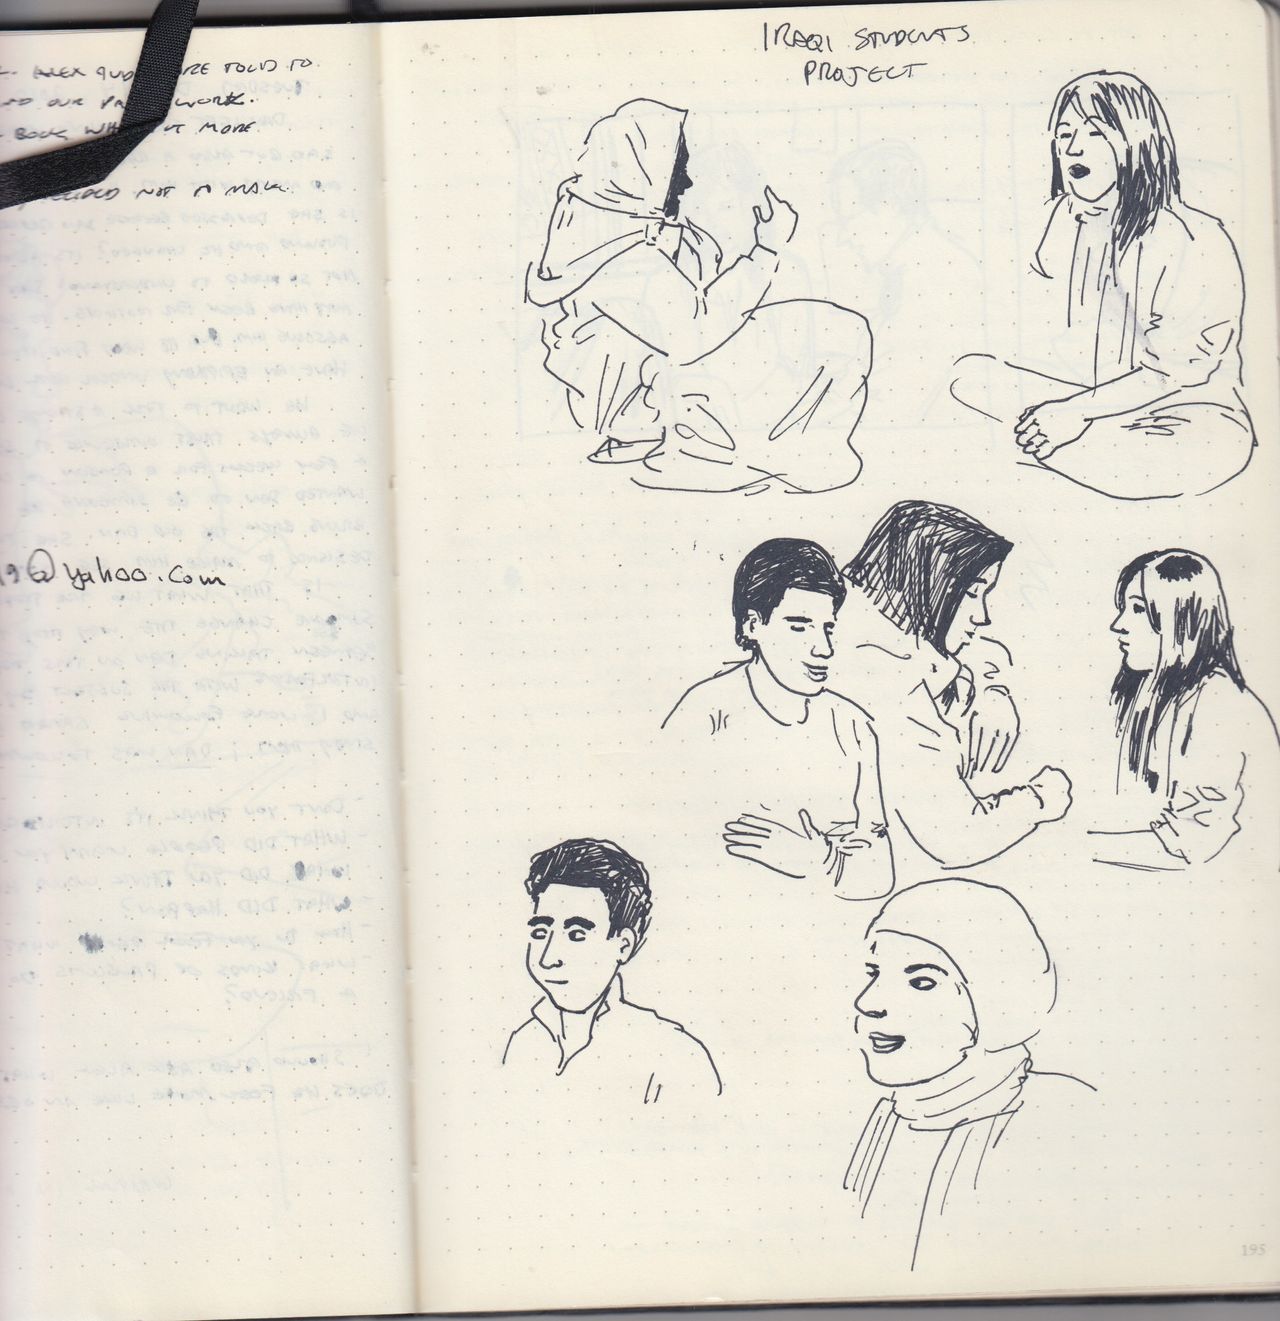 Sketches of students from the Iraqi Student Project, a nonprofit that prepares Iraqi students for undergraduate study in the U.S.